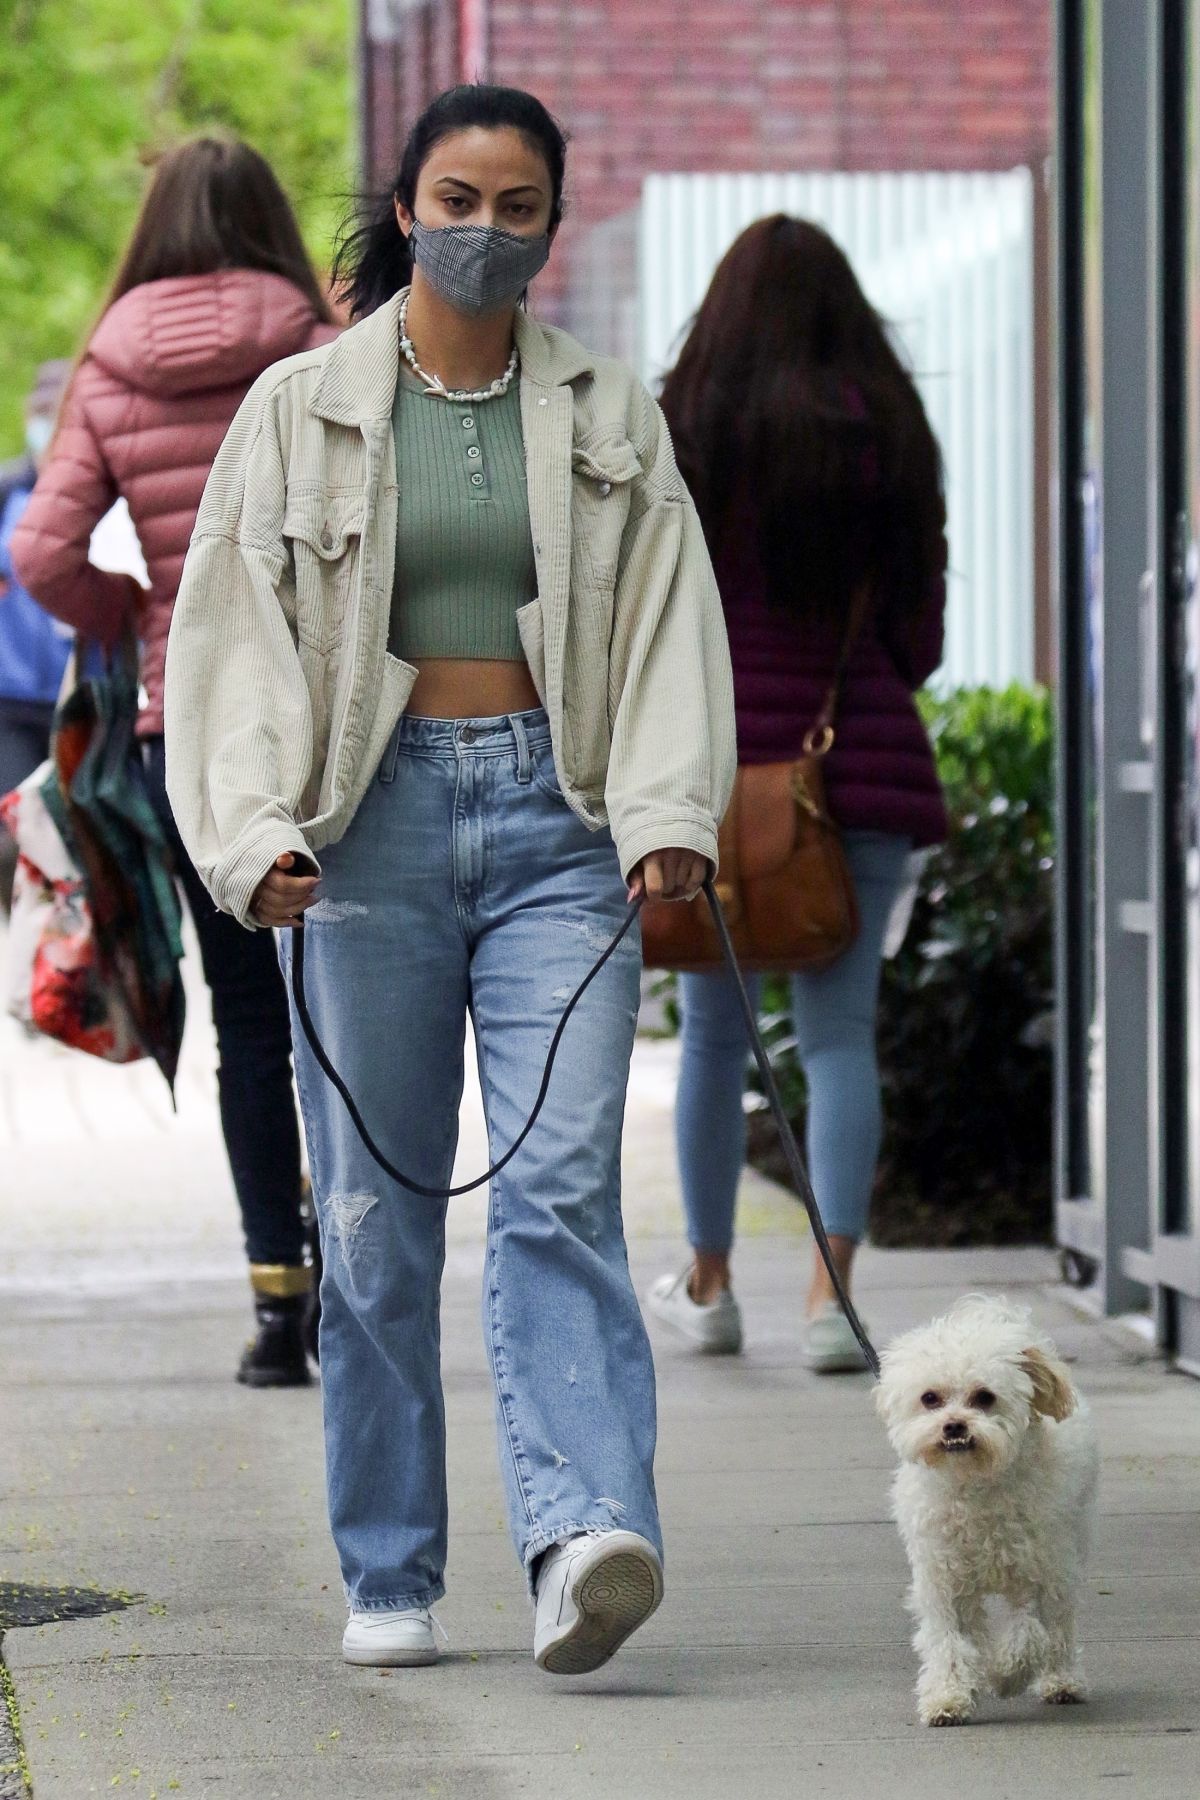 camila-mendes-out-with-her-dog-in-vancouver-04-24-2021-6.jpg